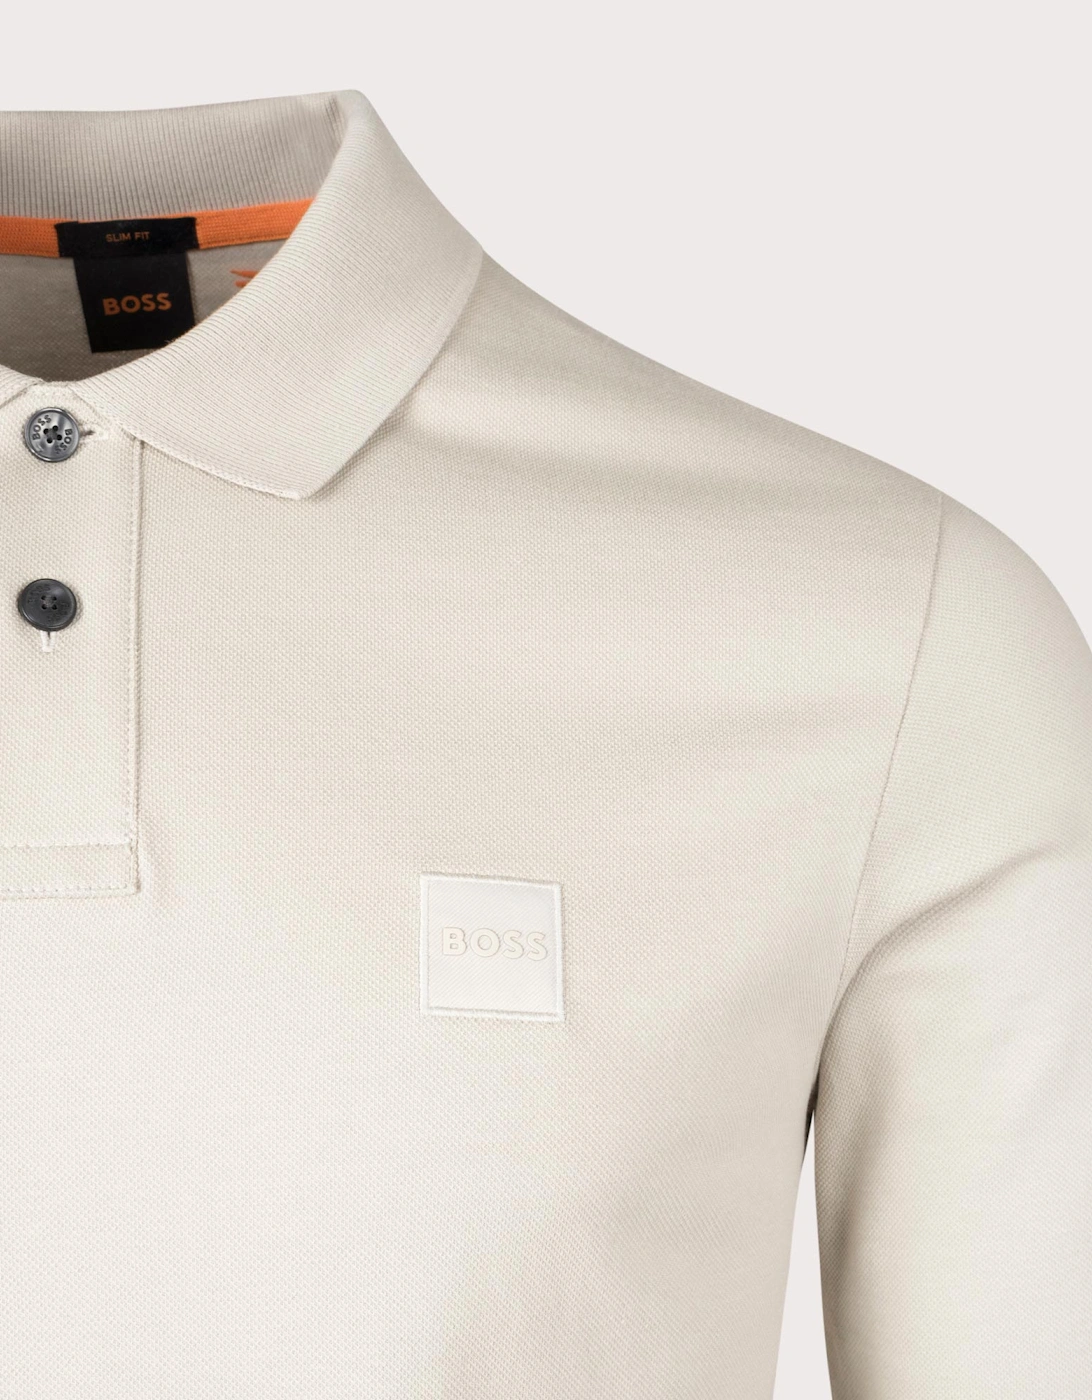 Passerby Polo Shirt